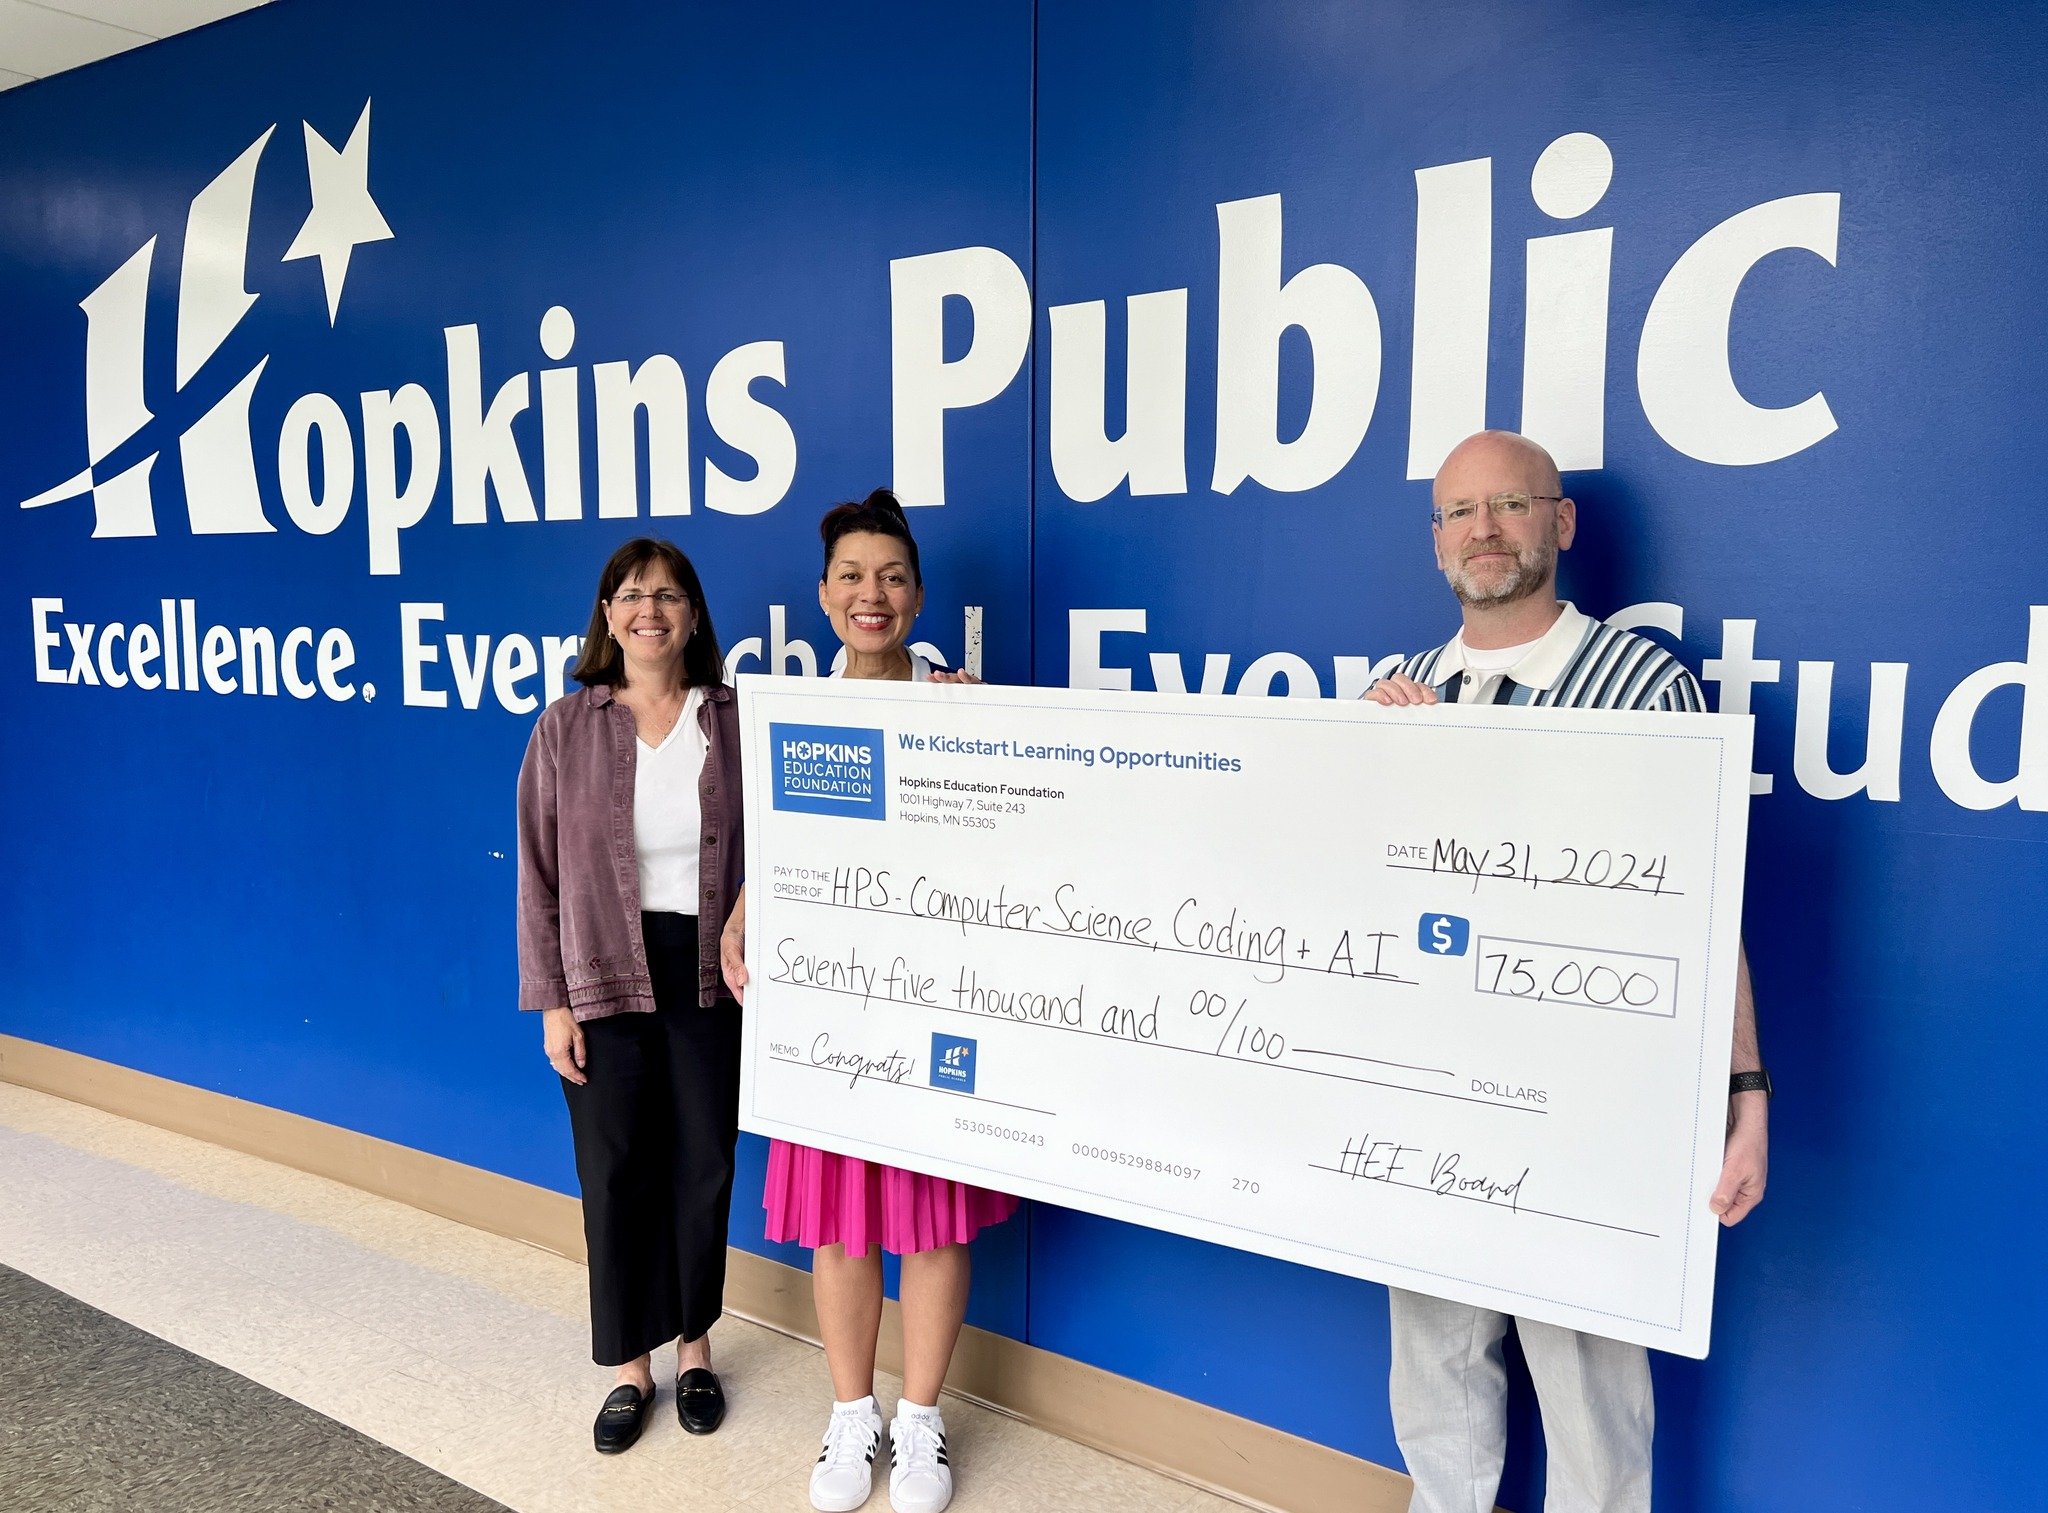 Last week, we officially awarded $75,000 to @hopkinsschools for our 2024 special project, Fueling Future Minds: Computer Science, Coding &amp; AI. Thanks to YOU, we were able to fully fund this initiative, which we kicked off at the Royal Bash in Mar